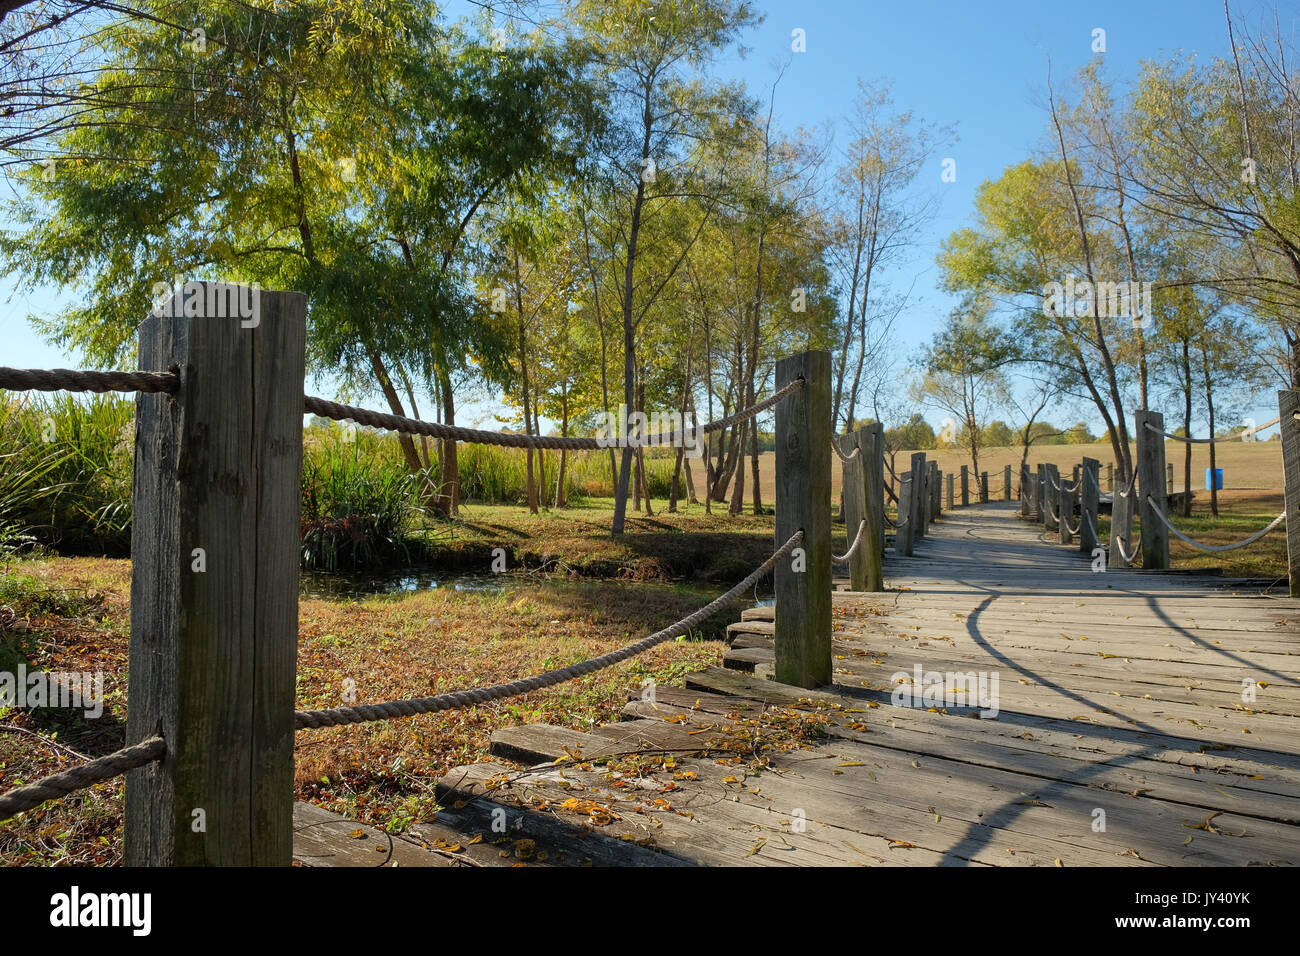 Walking trail made of wood in Blount Cultural Park, Montgomery Alabama, USA. This part is made of wood and crosses a small creek leading into a lake. Stock Photo